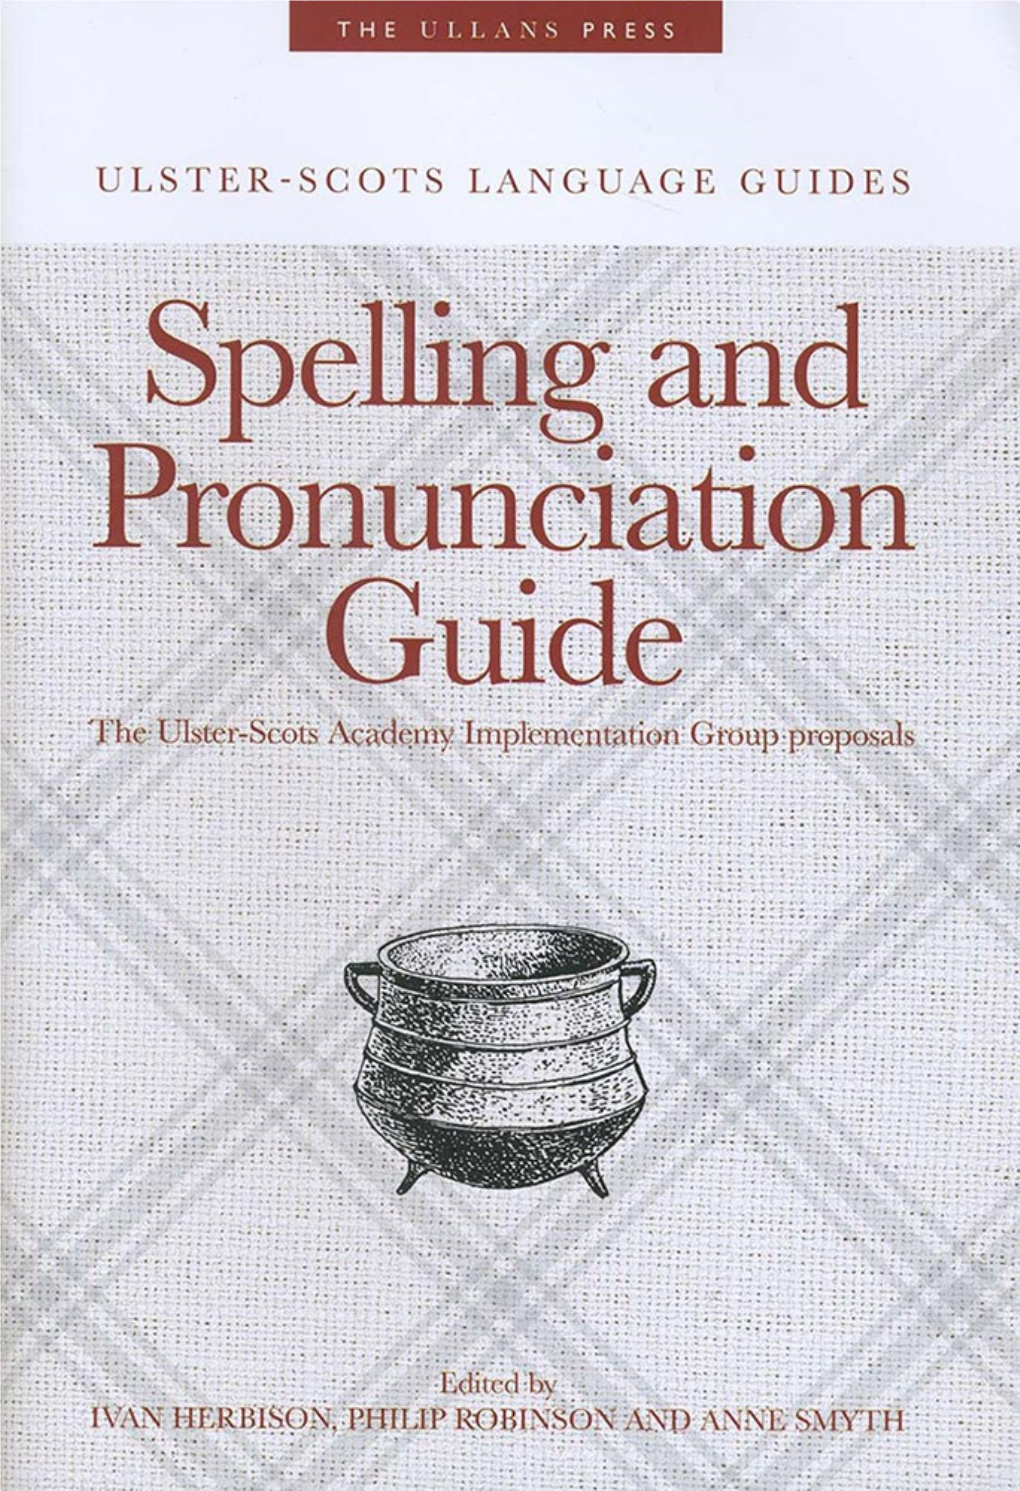 Spelling and Pronunciation Guide